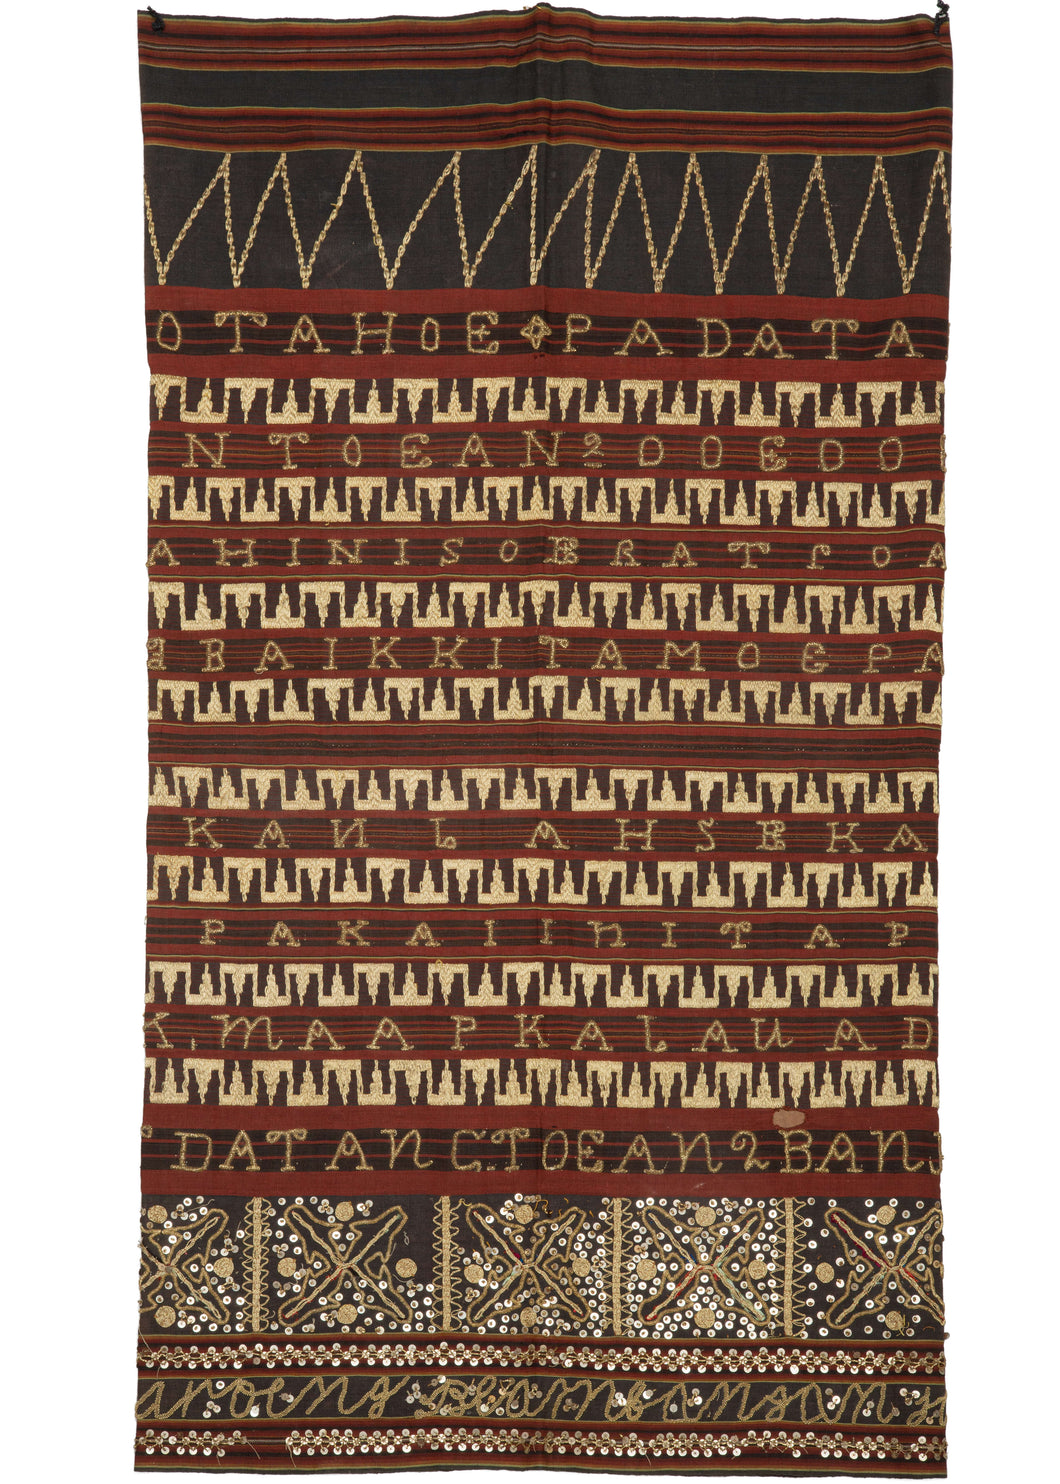 Indonesian Sumatran tapis cotton and metal sarong featuring a ground fabric is striped red and black and embroidered with gold thread. Text is commonly used for decorative and ritual effects. The text on this particular piece is written in a mix of Bahasa Indonesia and the local Lampung language and features well-wishes for the wearer of the tapis. 